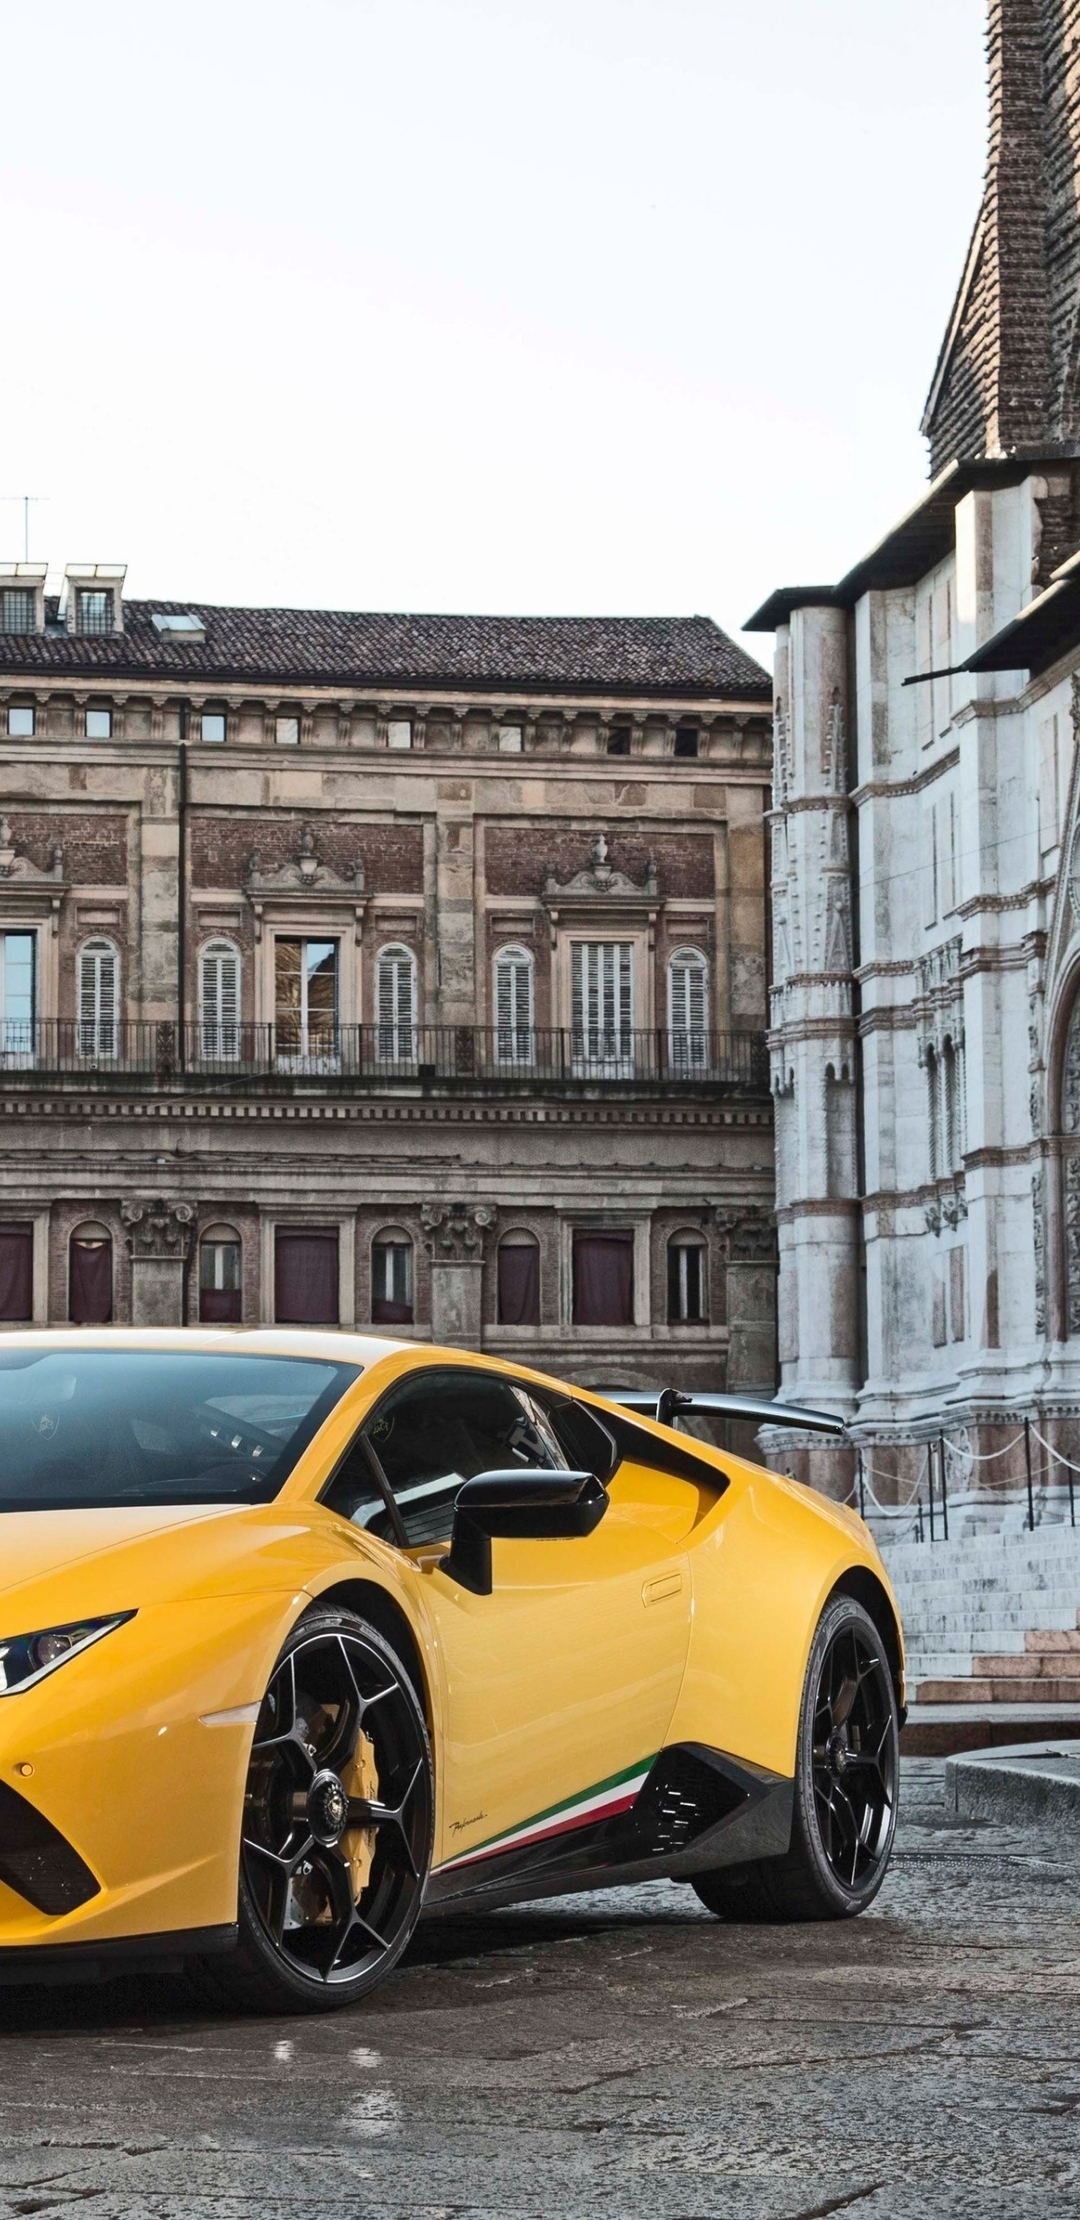 Image: Lamborghini Huracan, Coupe, yellow, sport car, supercars, old building, Italy